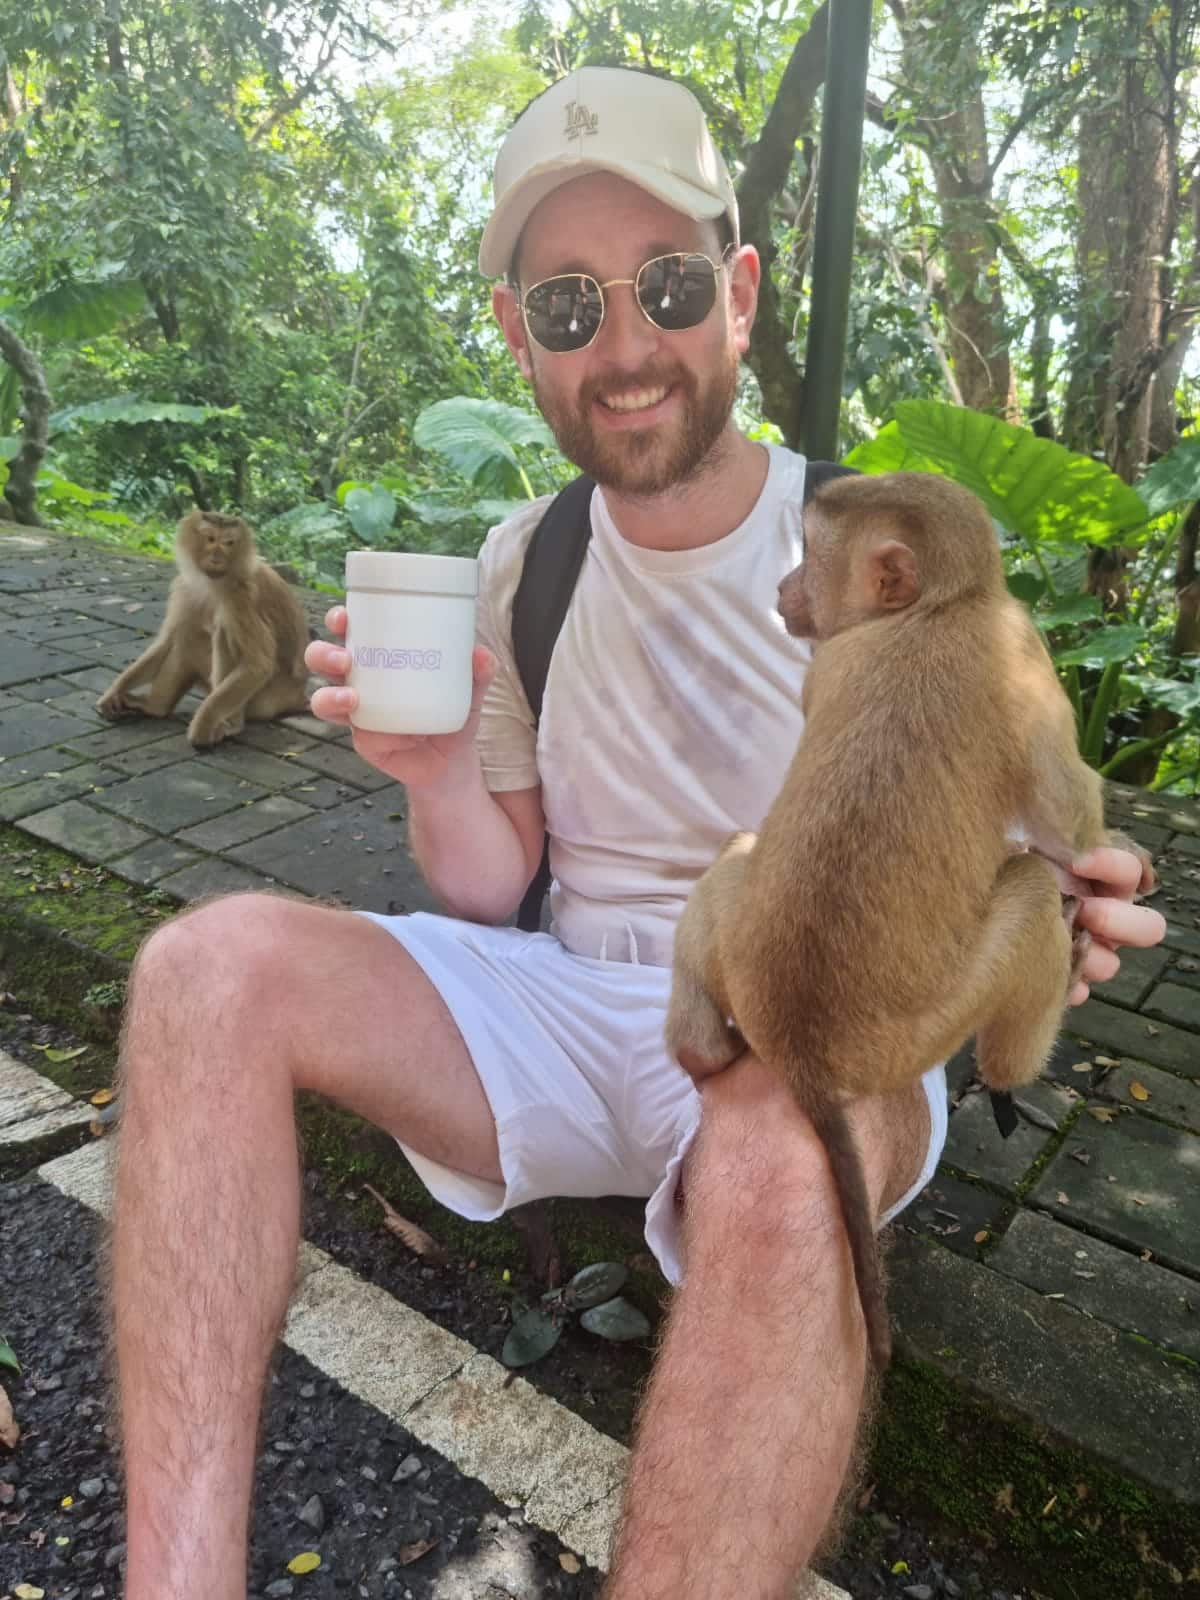 A smiling man in a white baseball cap sitting in a tropical environment, holding a beverage cup in his right hand and touching a brown monkey that's balancing on his left knee with his left hand.